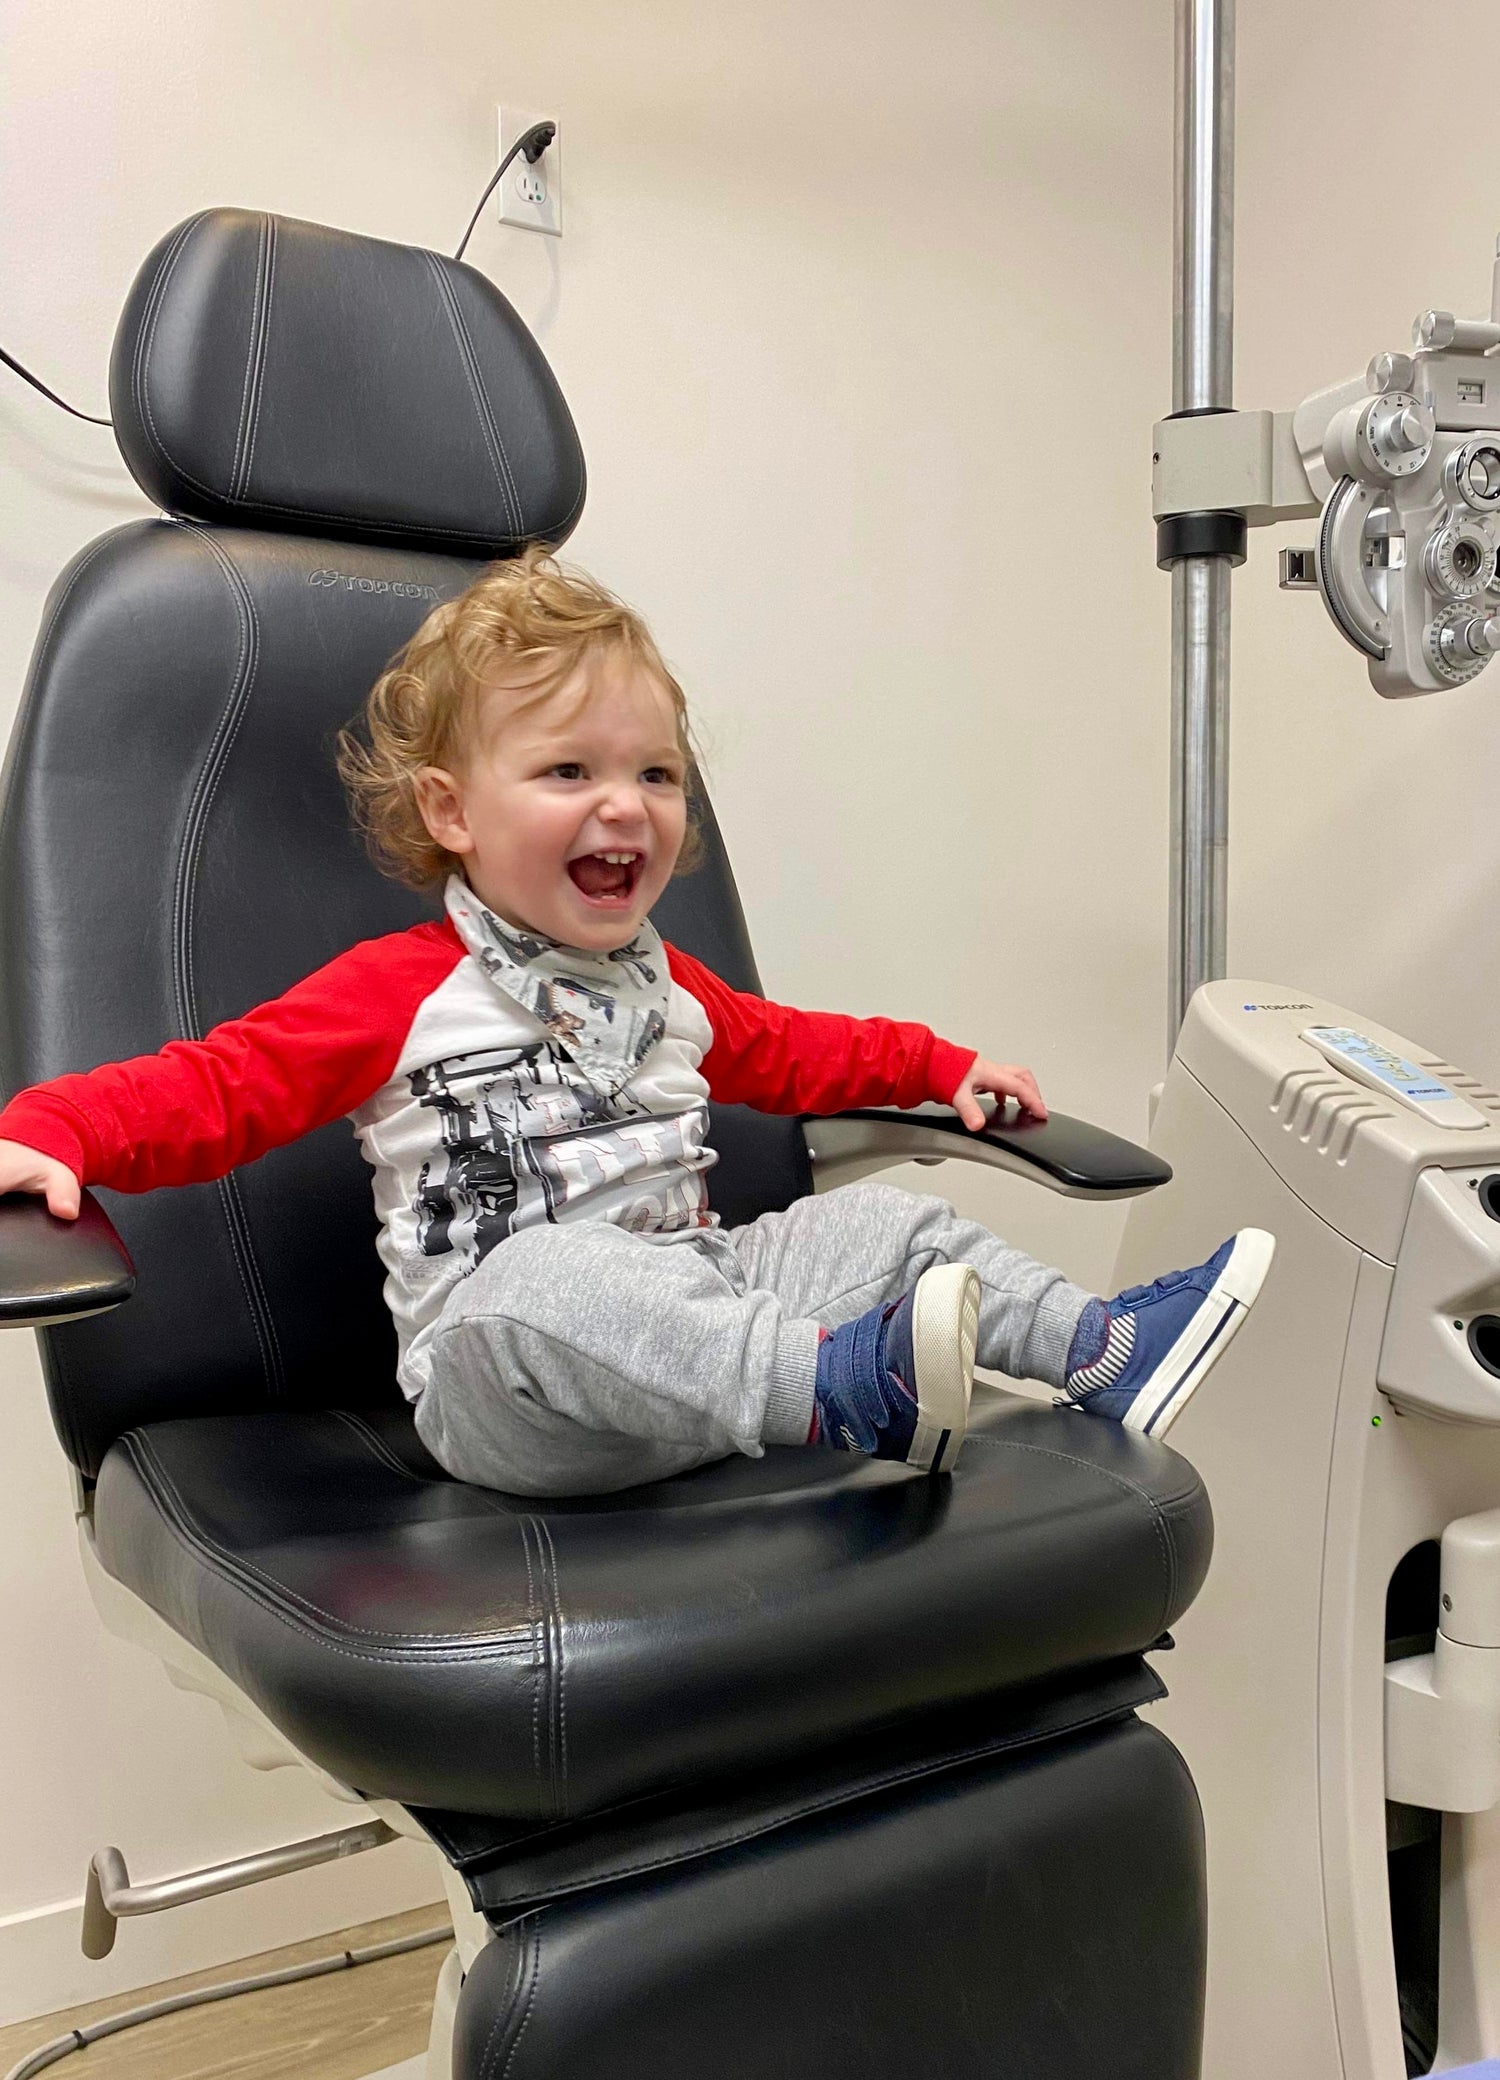 Infant boy sitting in an eye exam chair, laughing and looking excited.